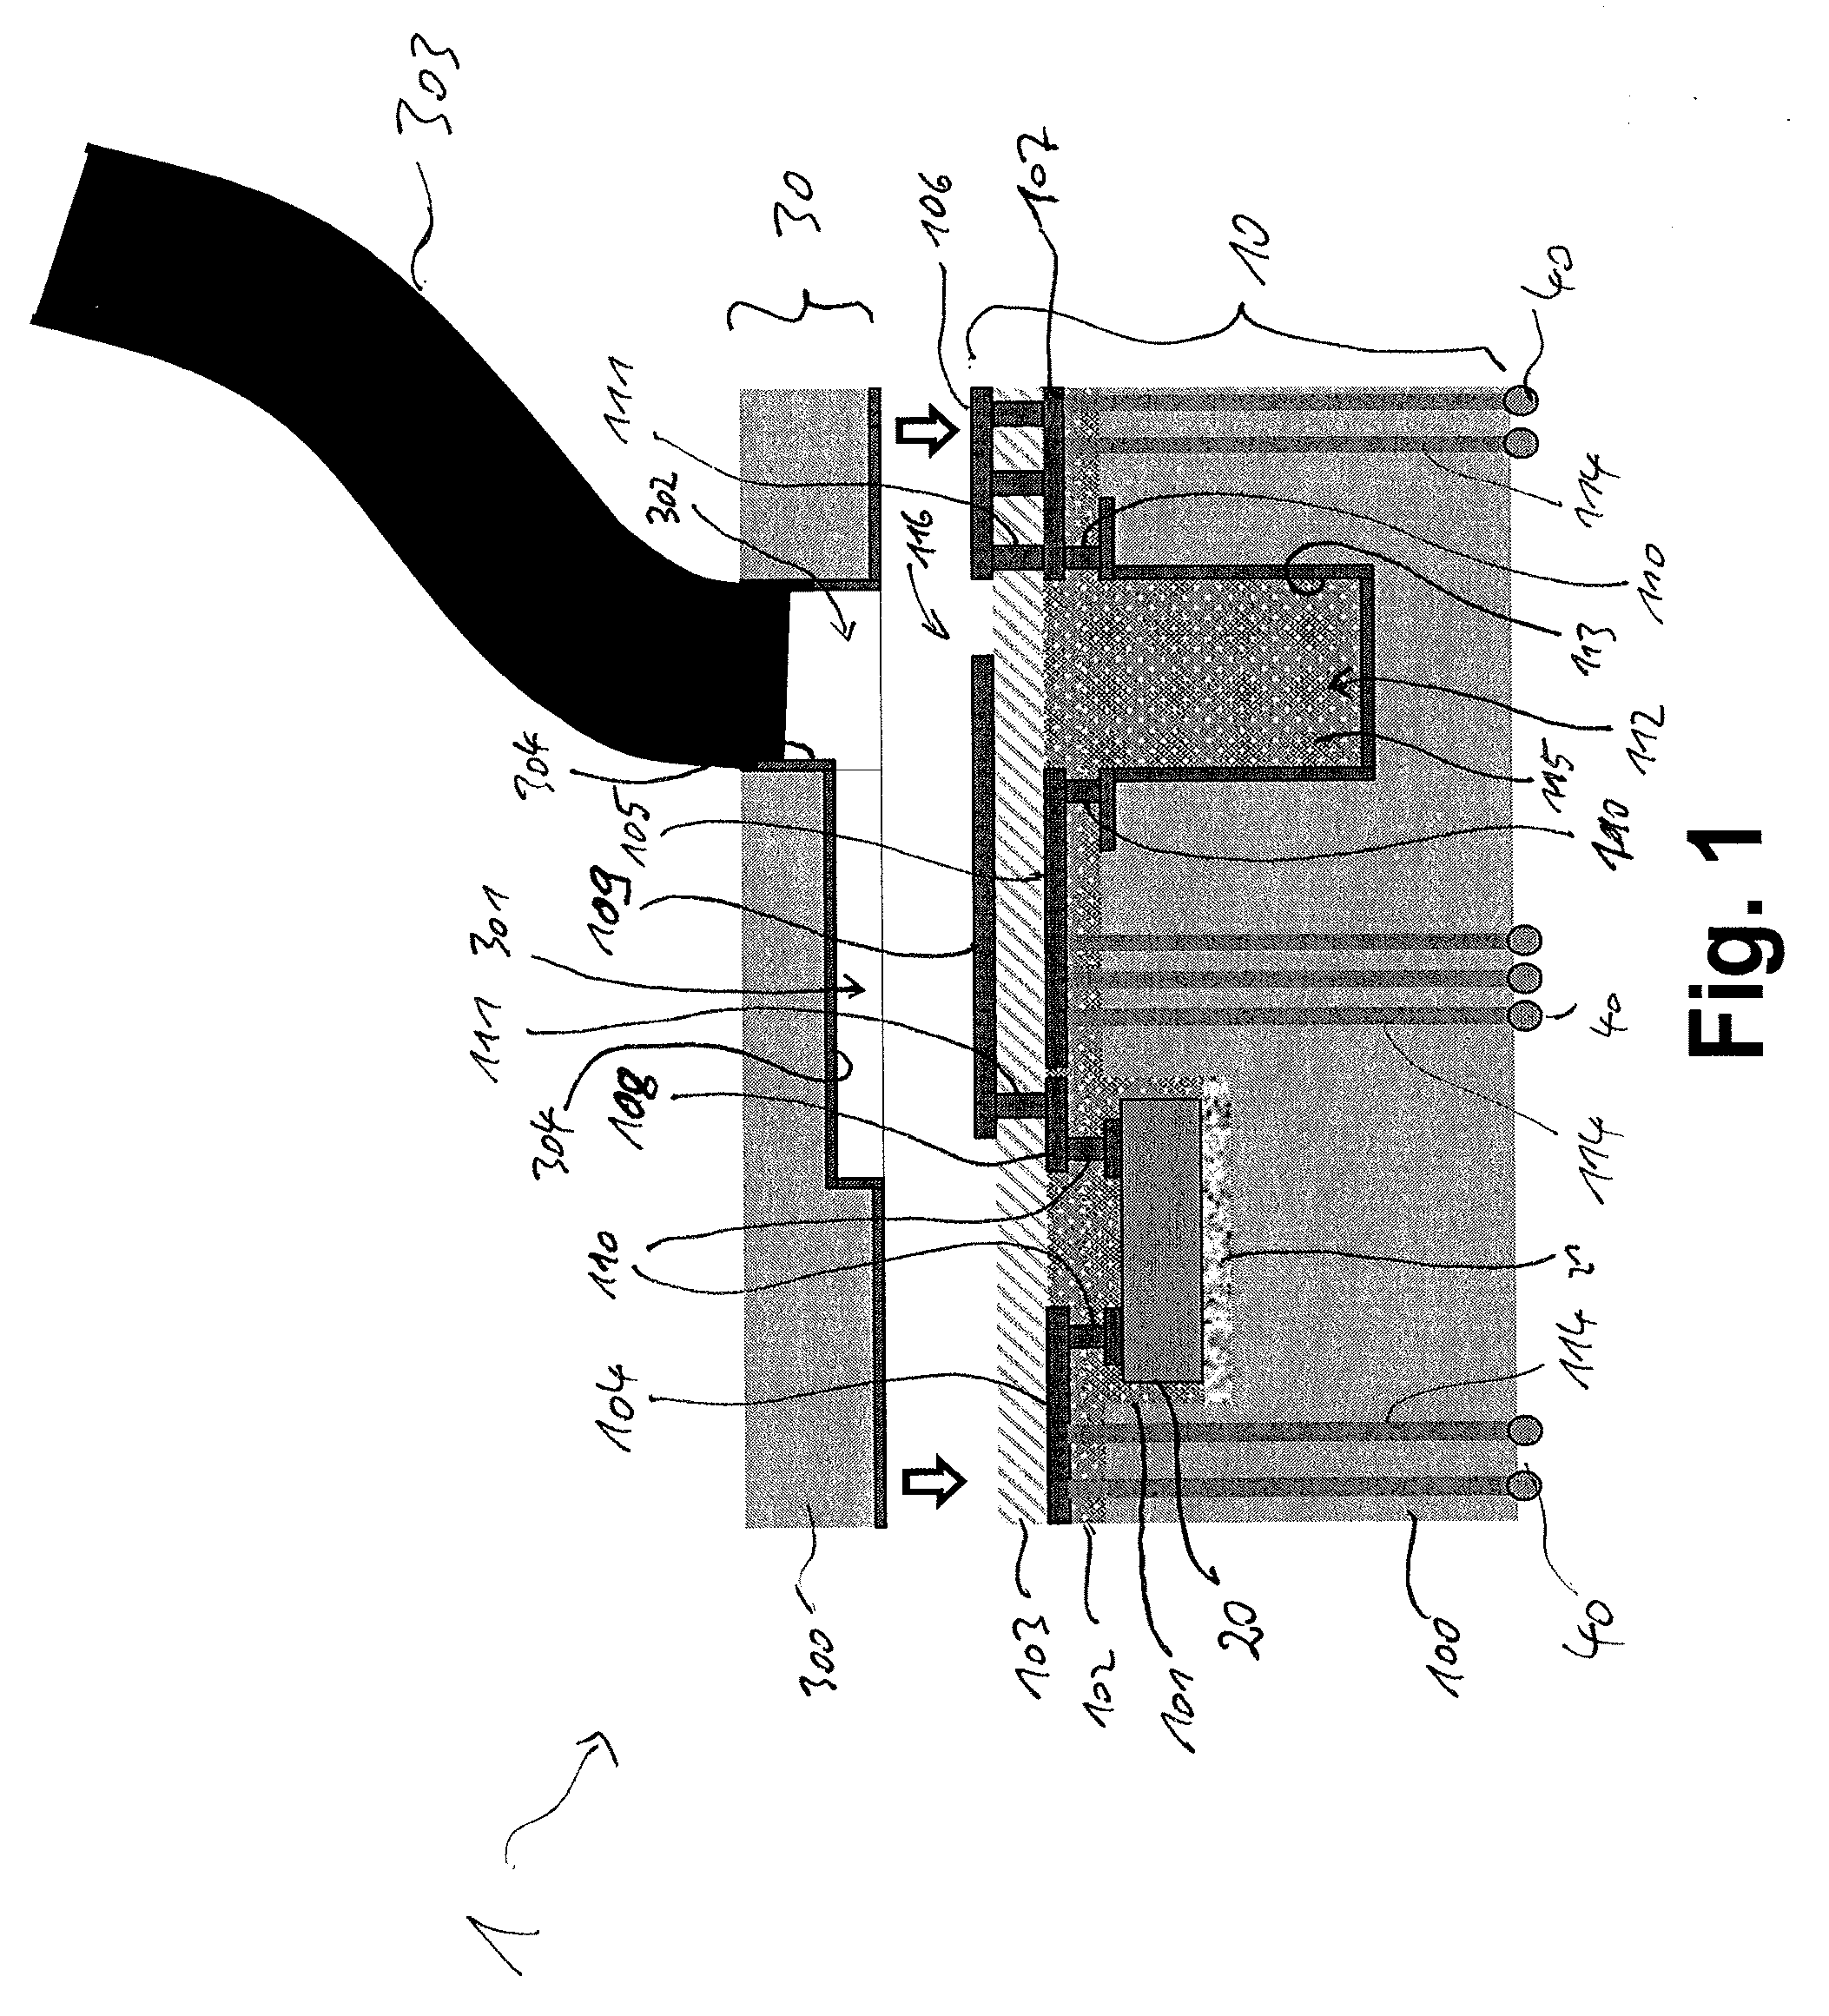 Package and antenna apparatus including package